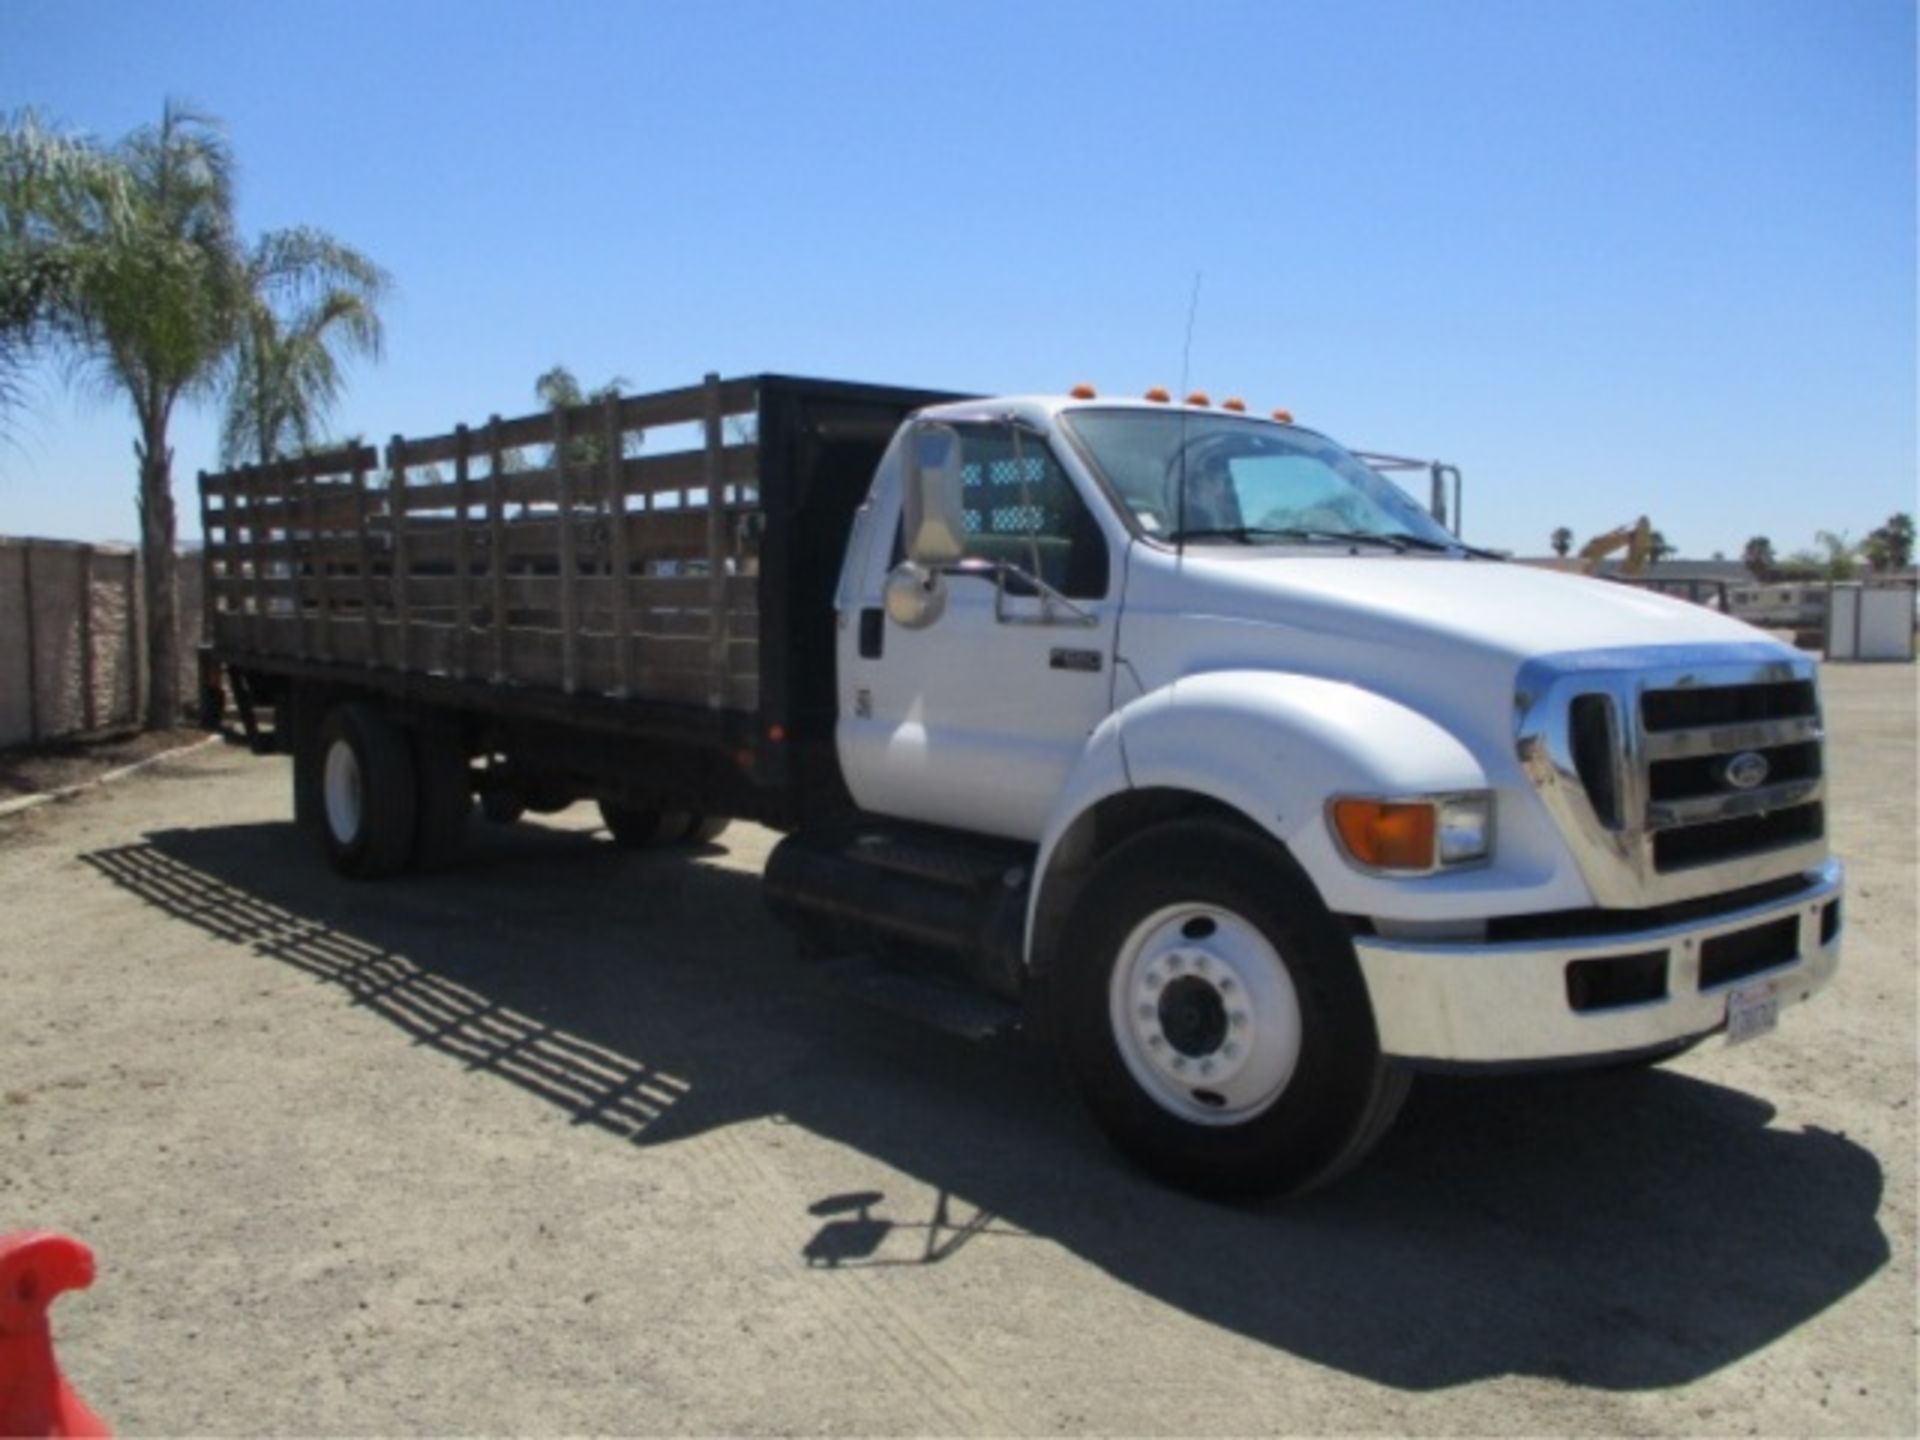 2005 Ford F650 S/A Flatbed Stakebed Truck, Cat C7 Acert 7.2L 6-Cyl Diesel, Automatic, Lift Gate, 24' - Image 9 of 61